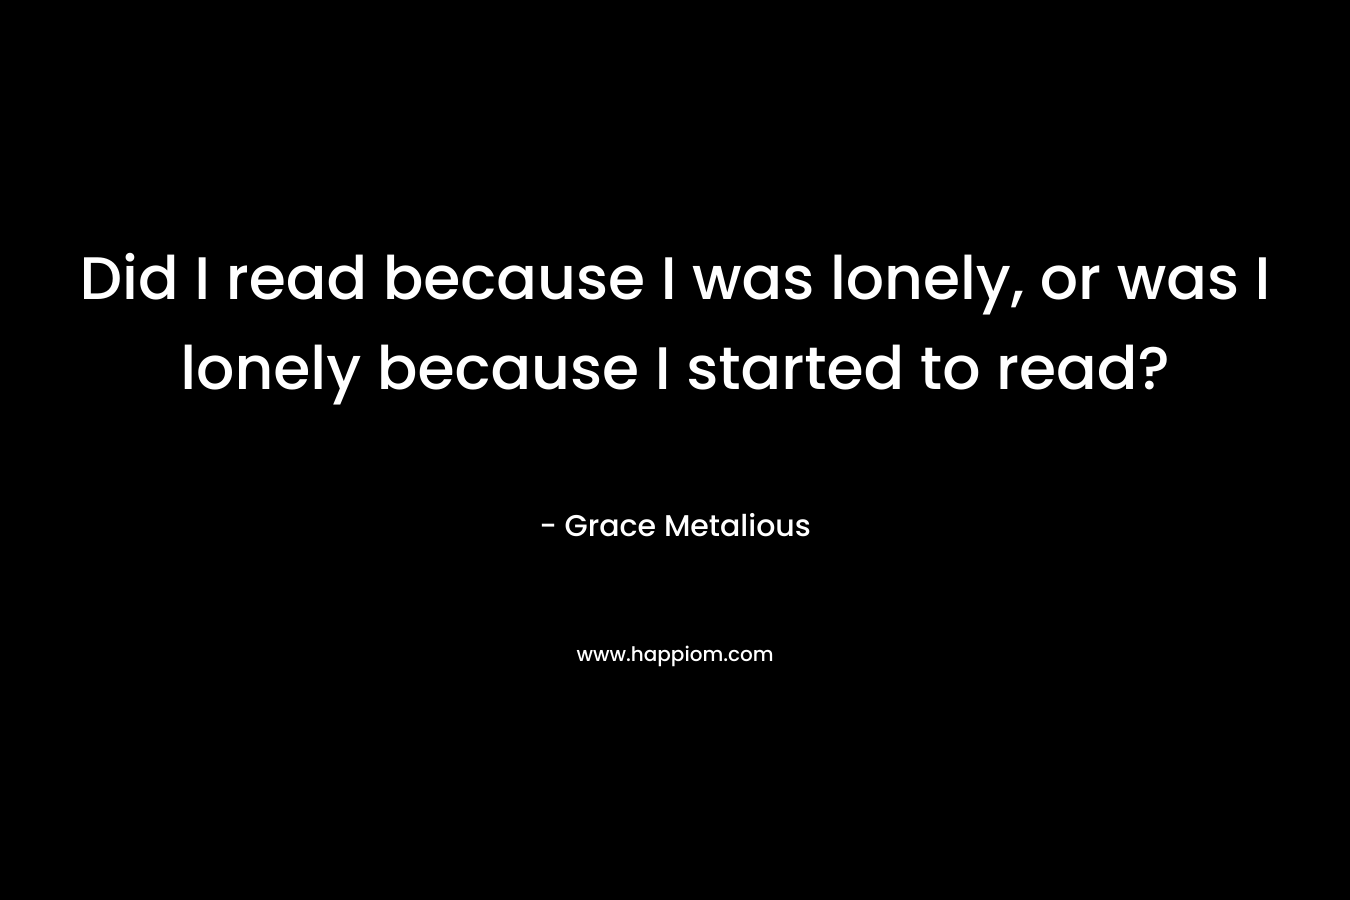 Did I read because I was lonely, or was I lonely because I started to read?